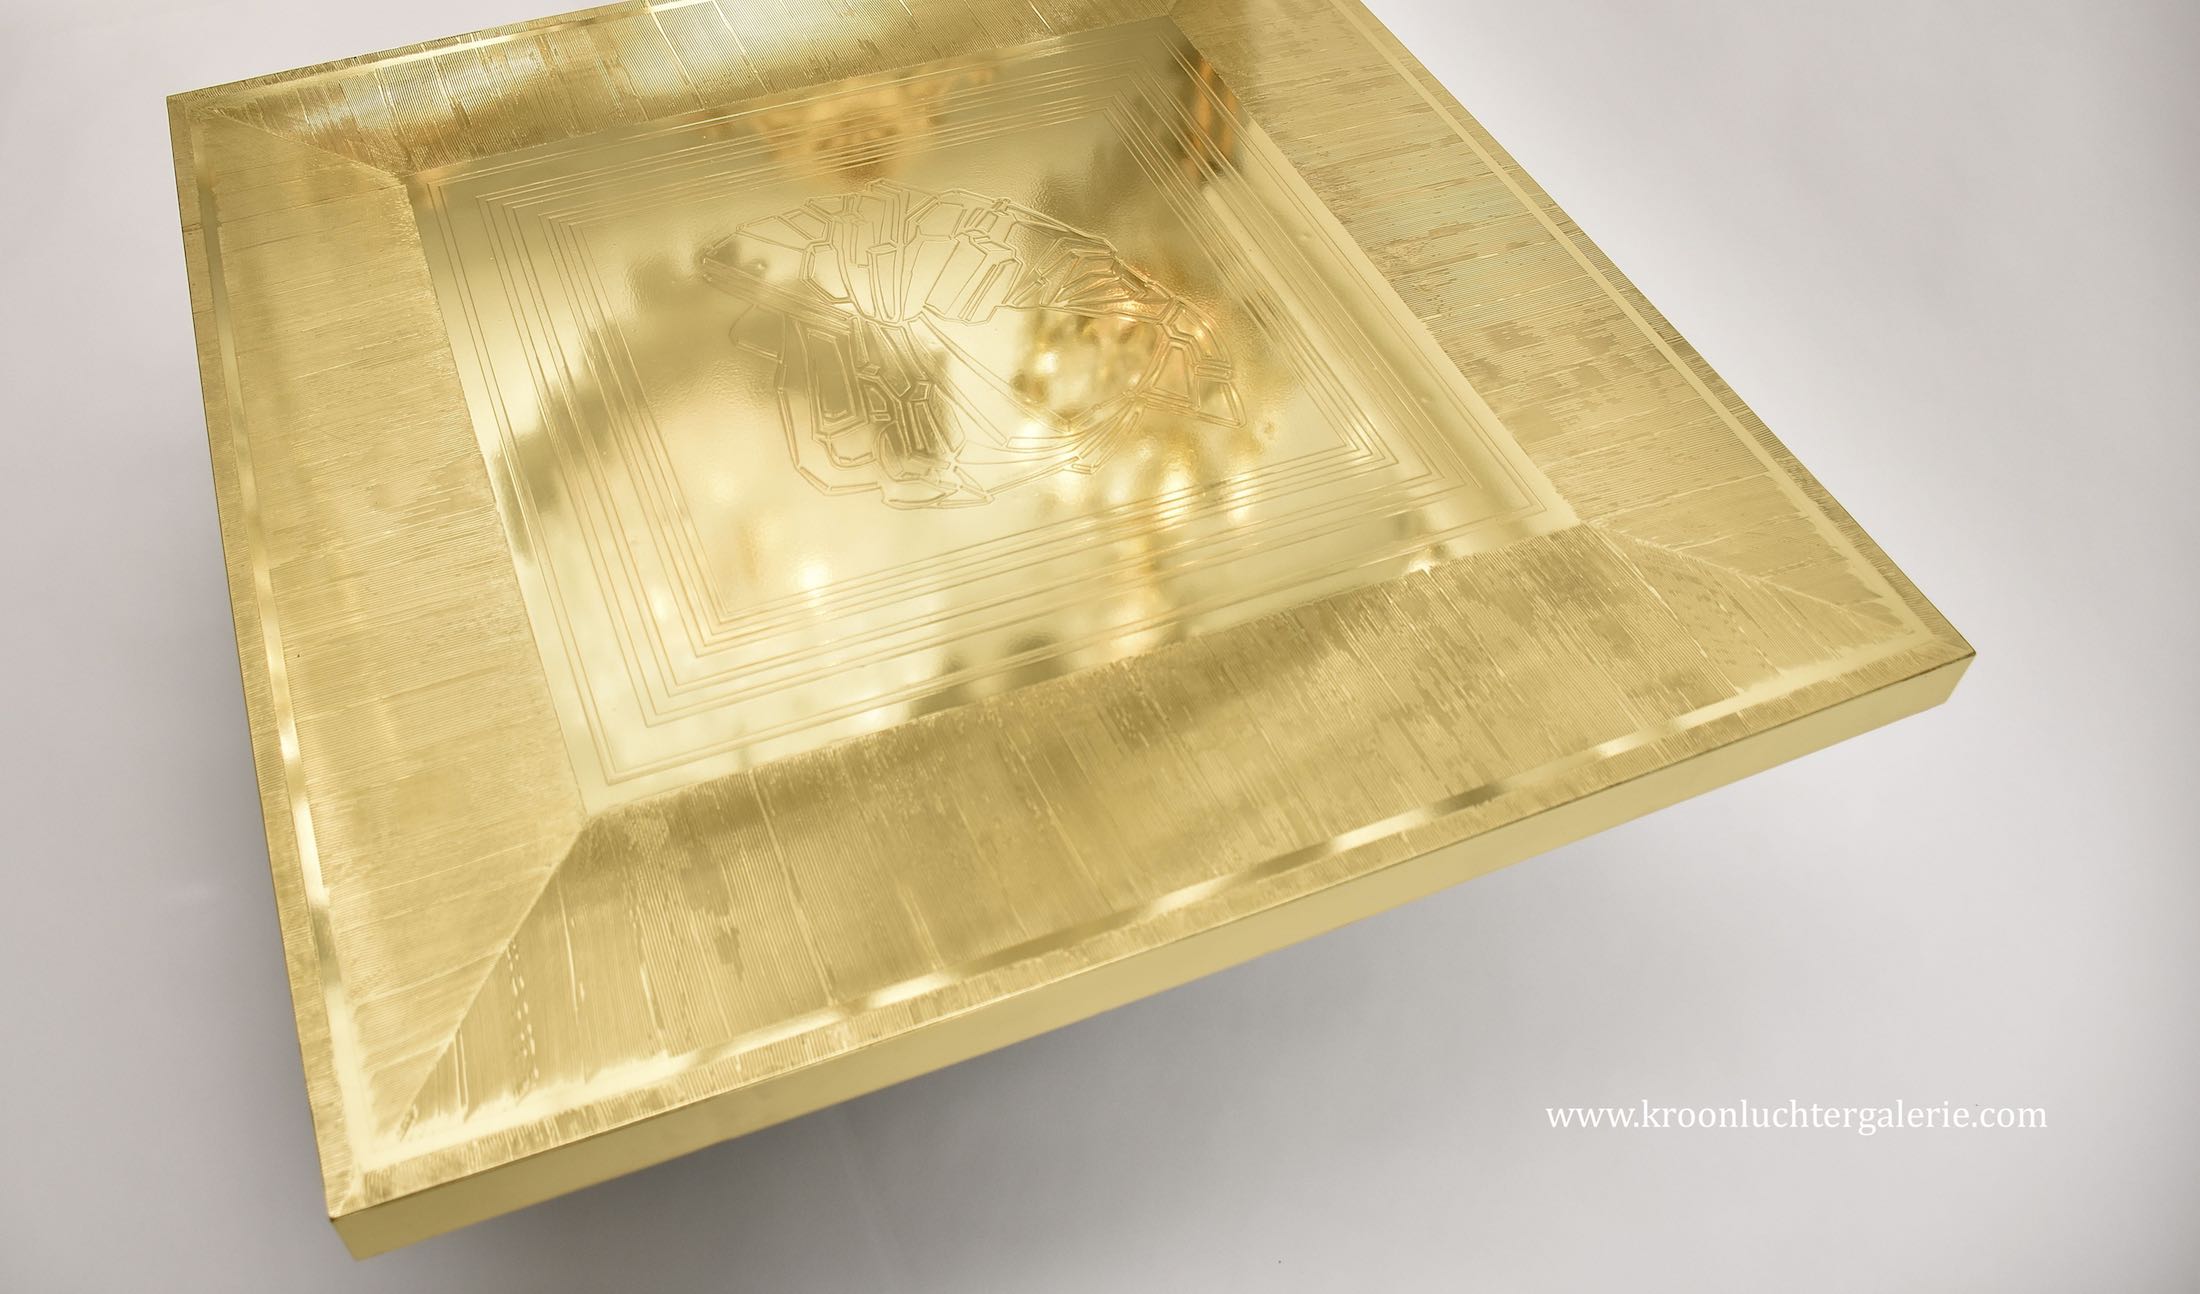 Stunning etched brass coffee table by Lova Creations